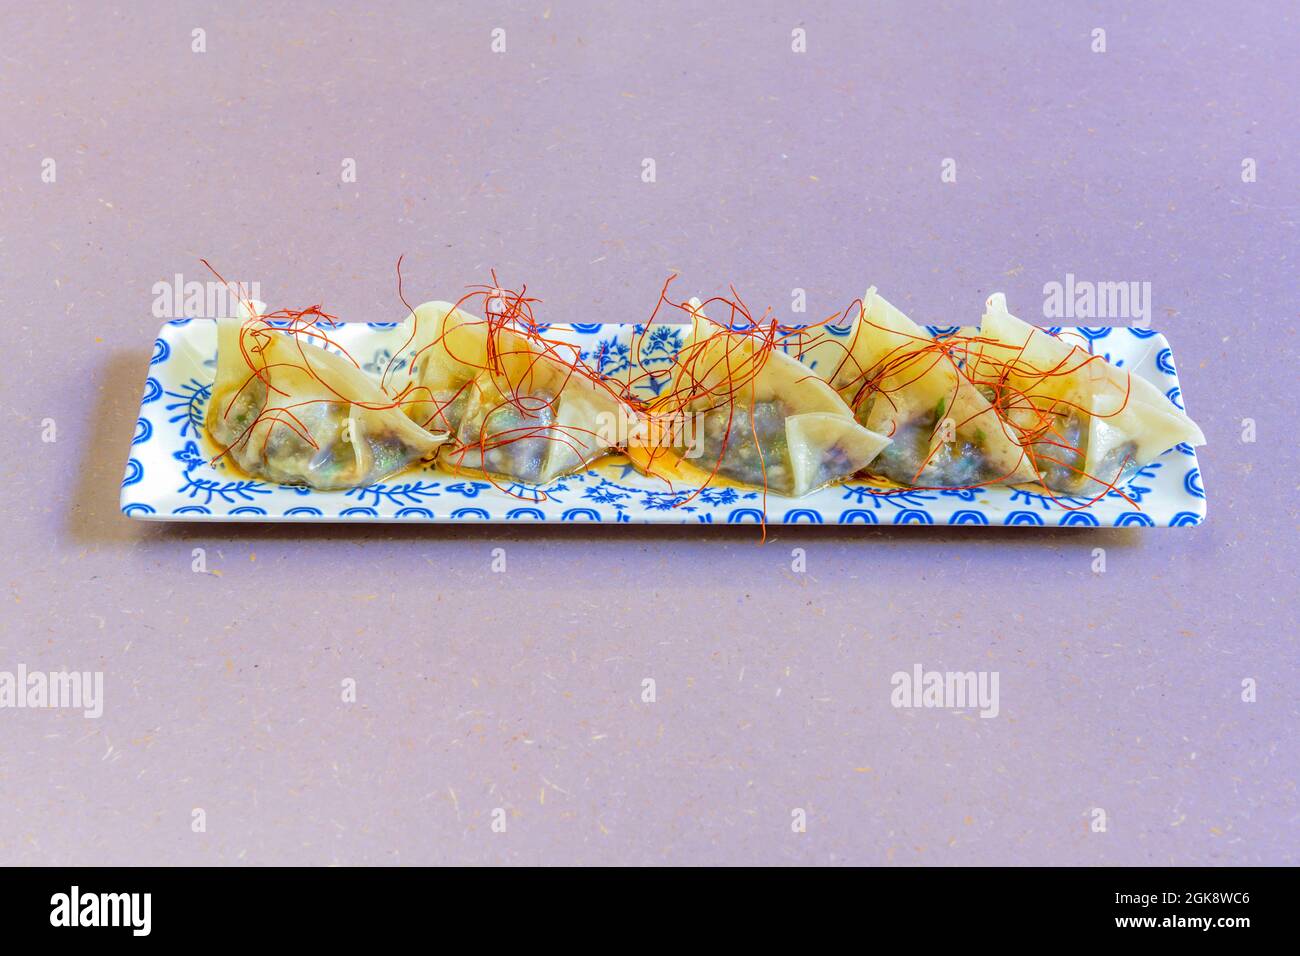 pretty long blue patterned tray with steamed stuffed dumplings with saffron strands on top Stock Photo